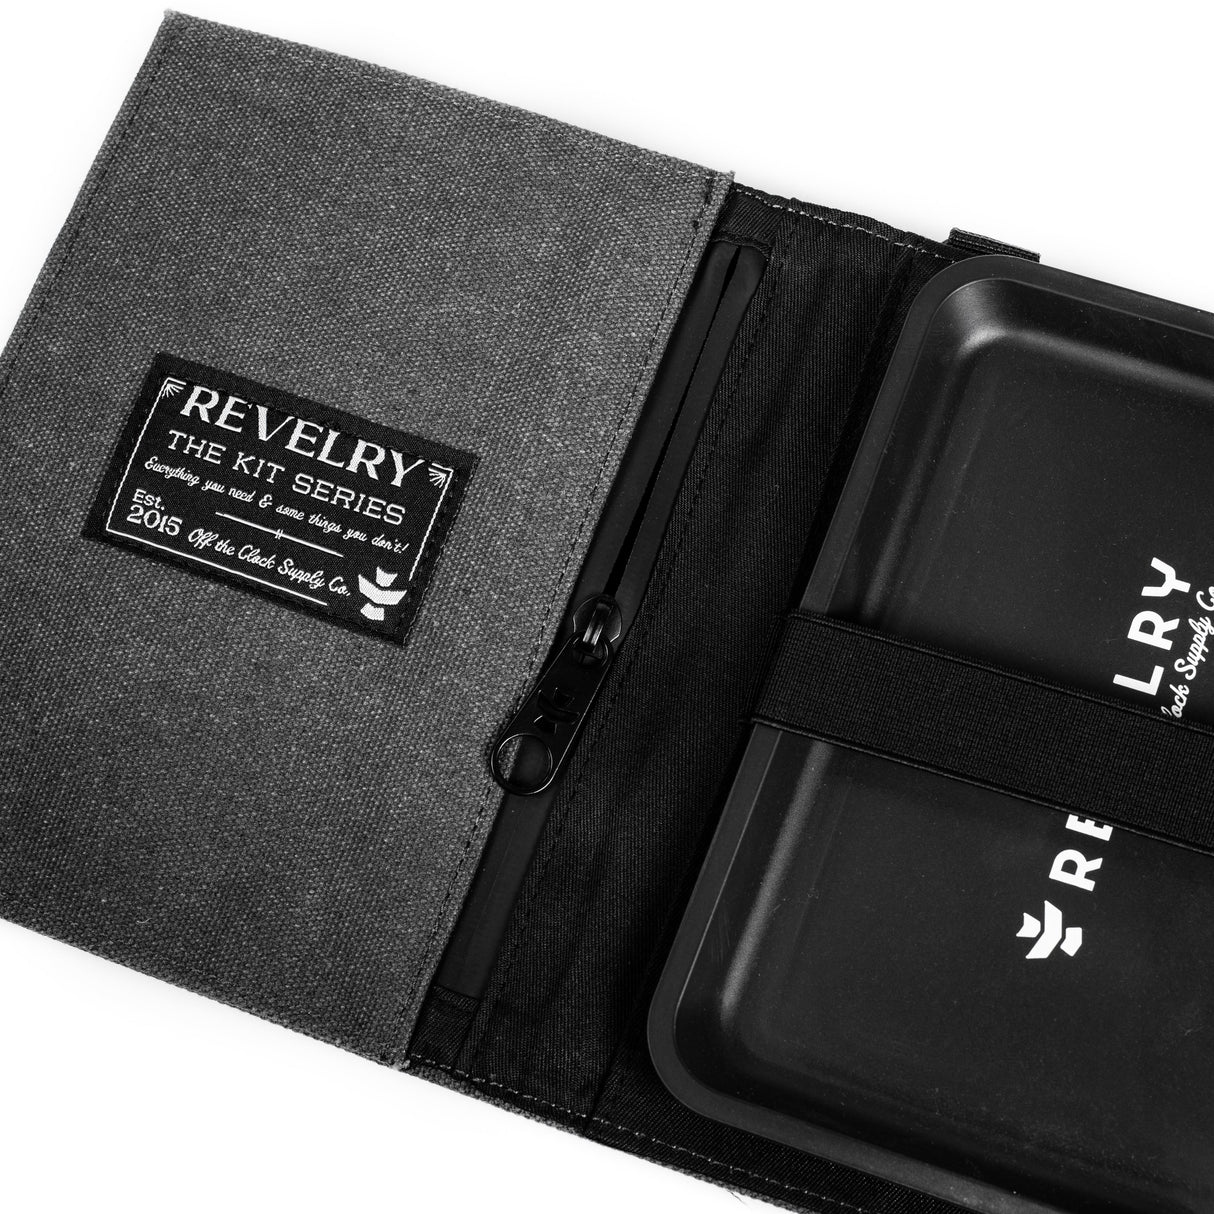 Revelry Supply - The Rolling Kit Opened Showing Smell Proof Case and Compartments